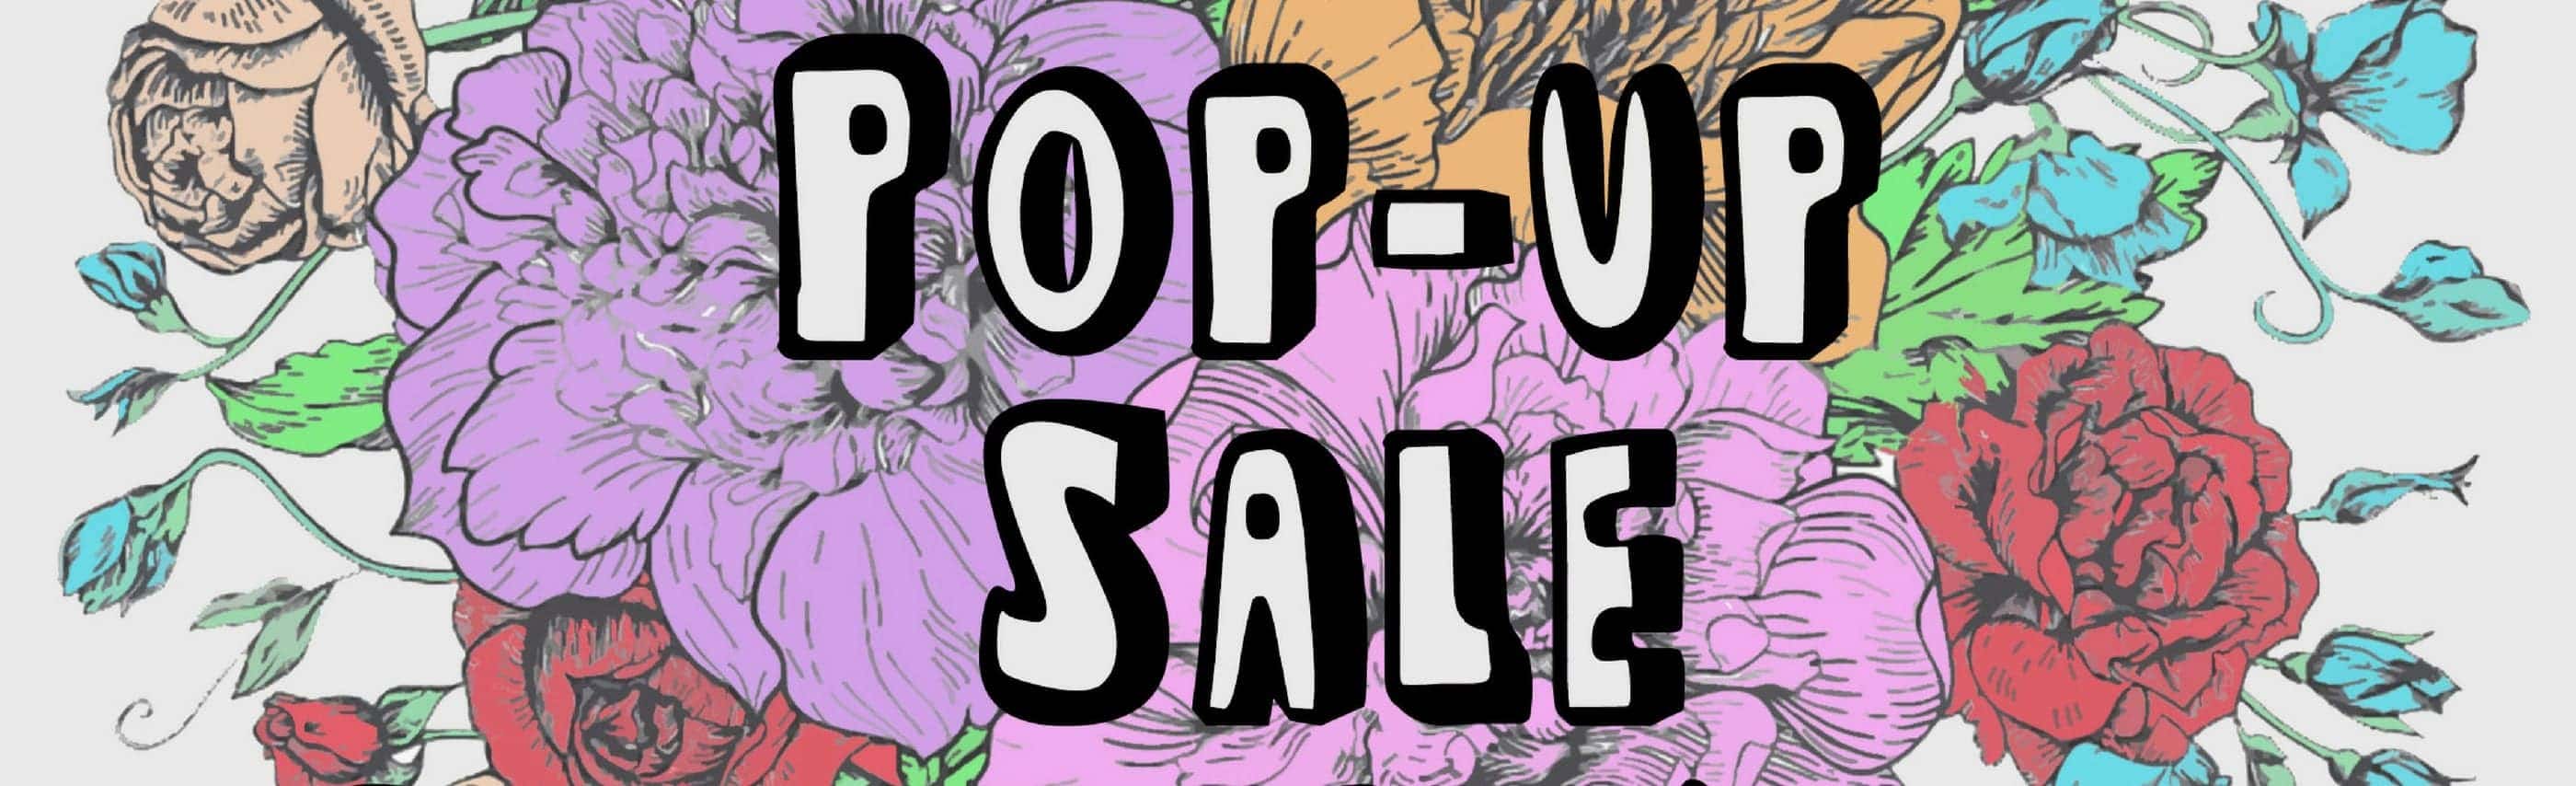 Spring Collective Pop-Up Sale